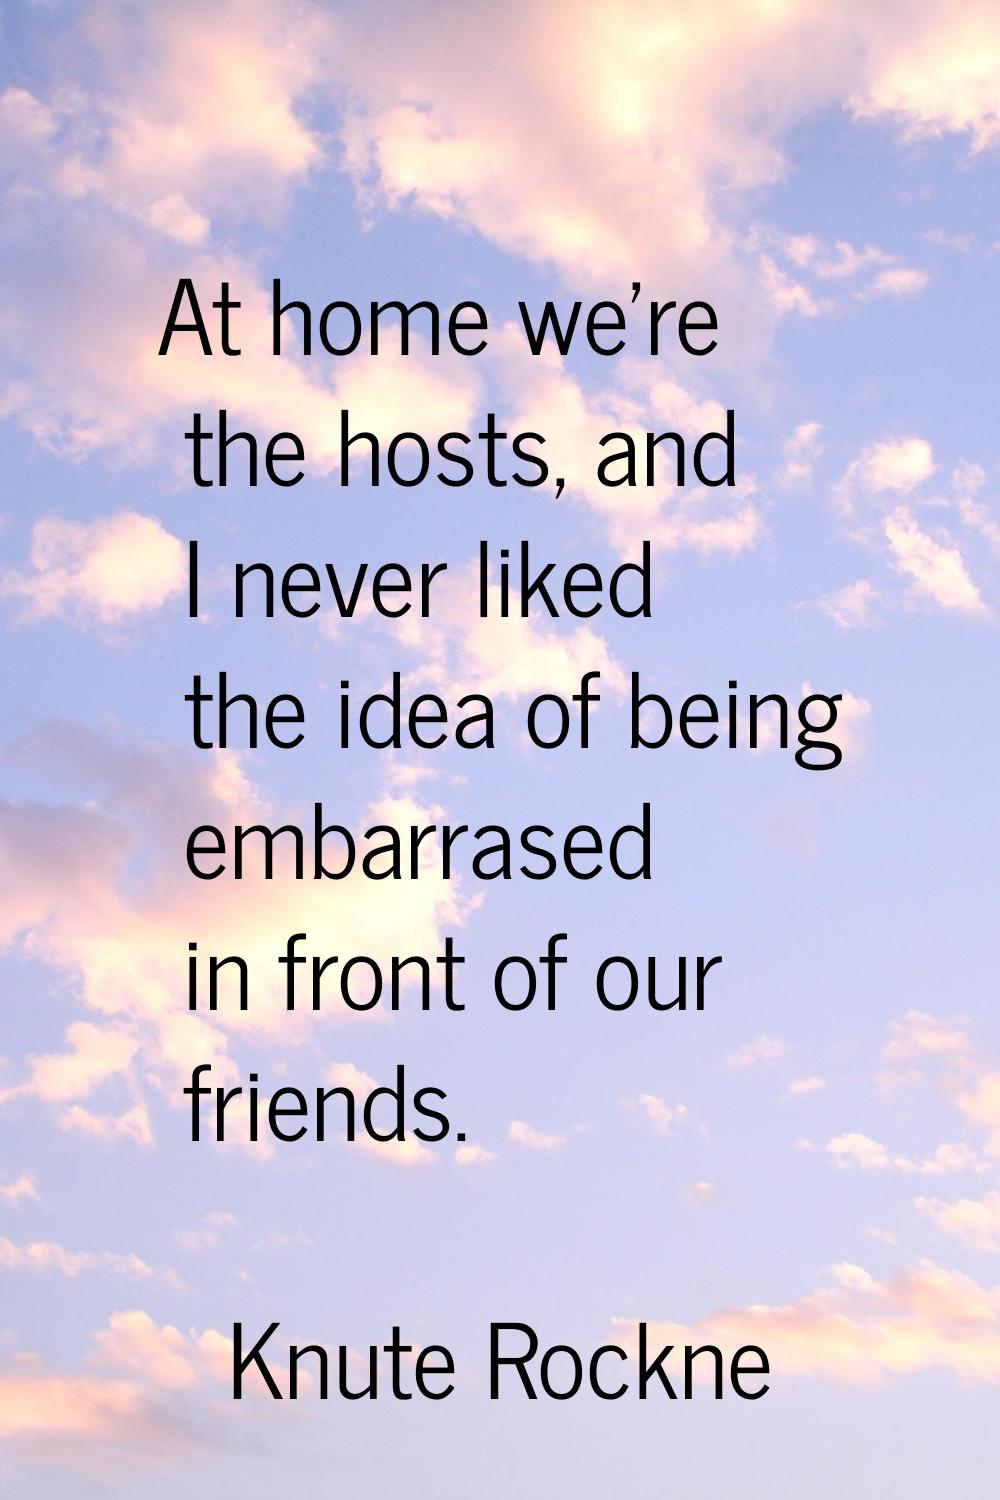 At home we're the hosts, and I never liked the idea of being embarrased in front of our friends.